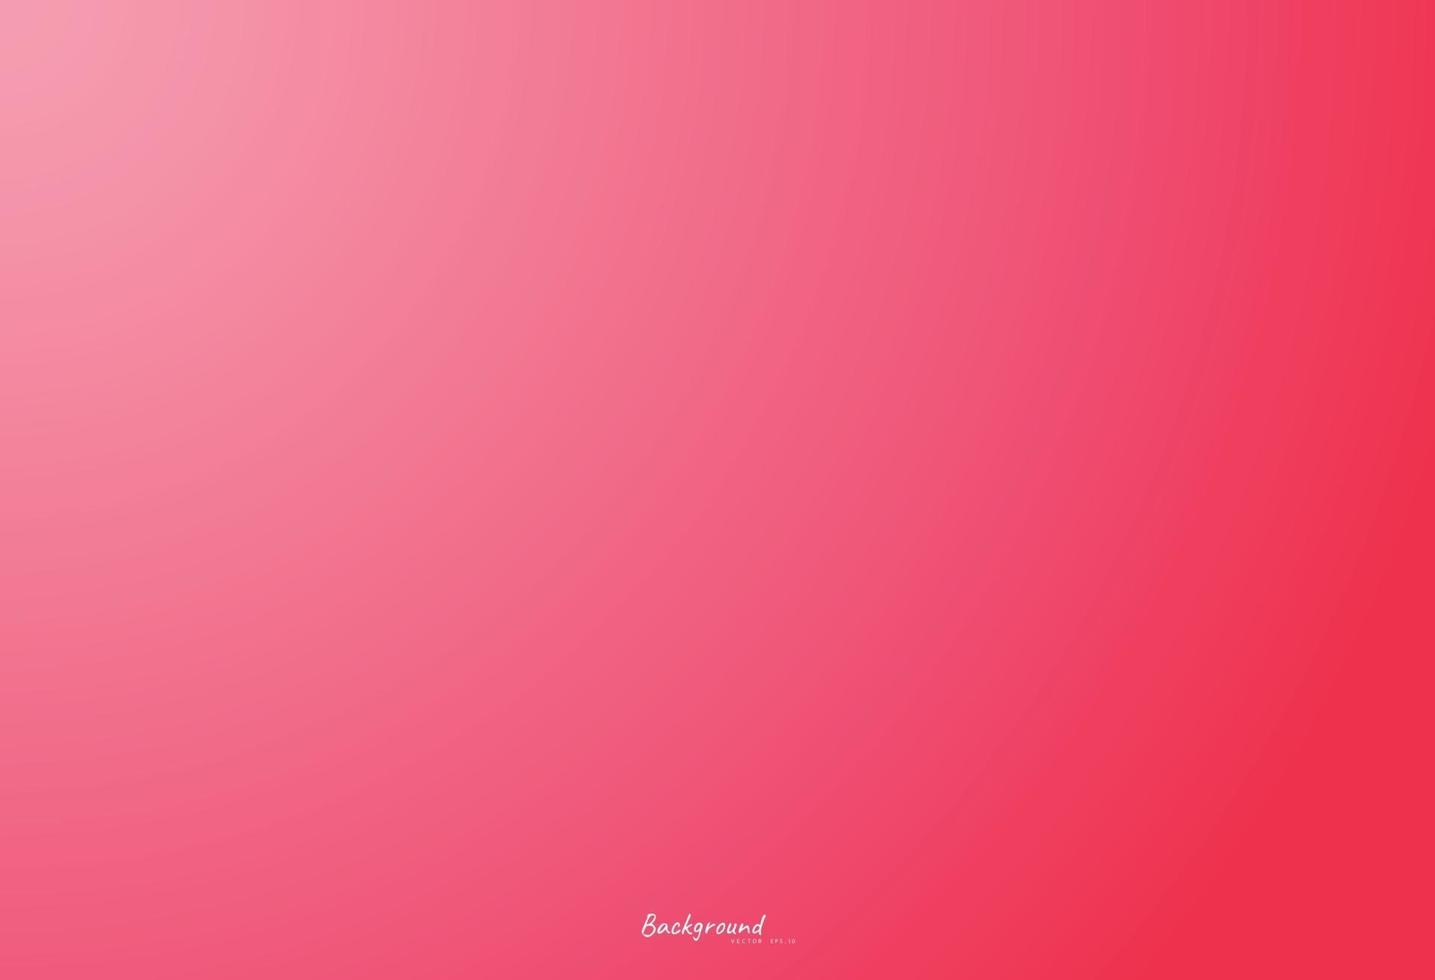 Colorful pink background vector